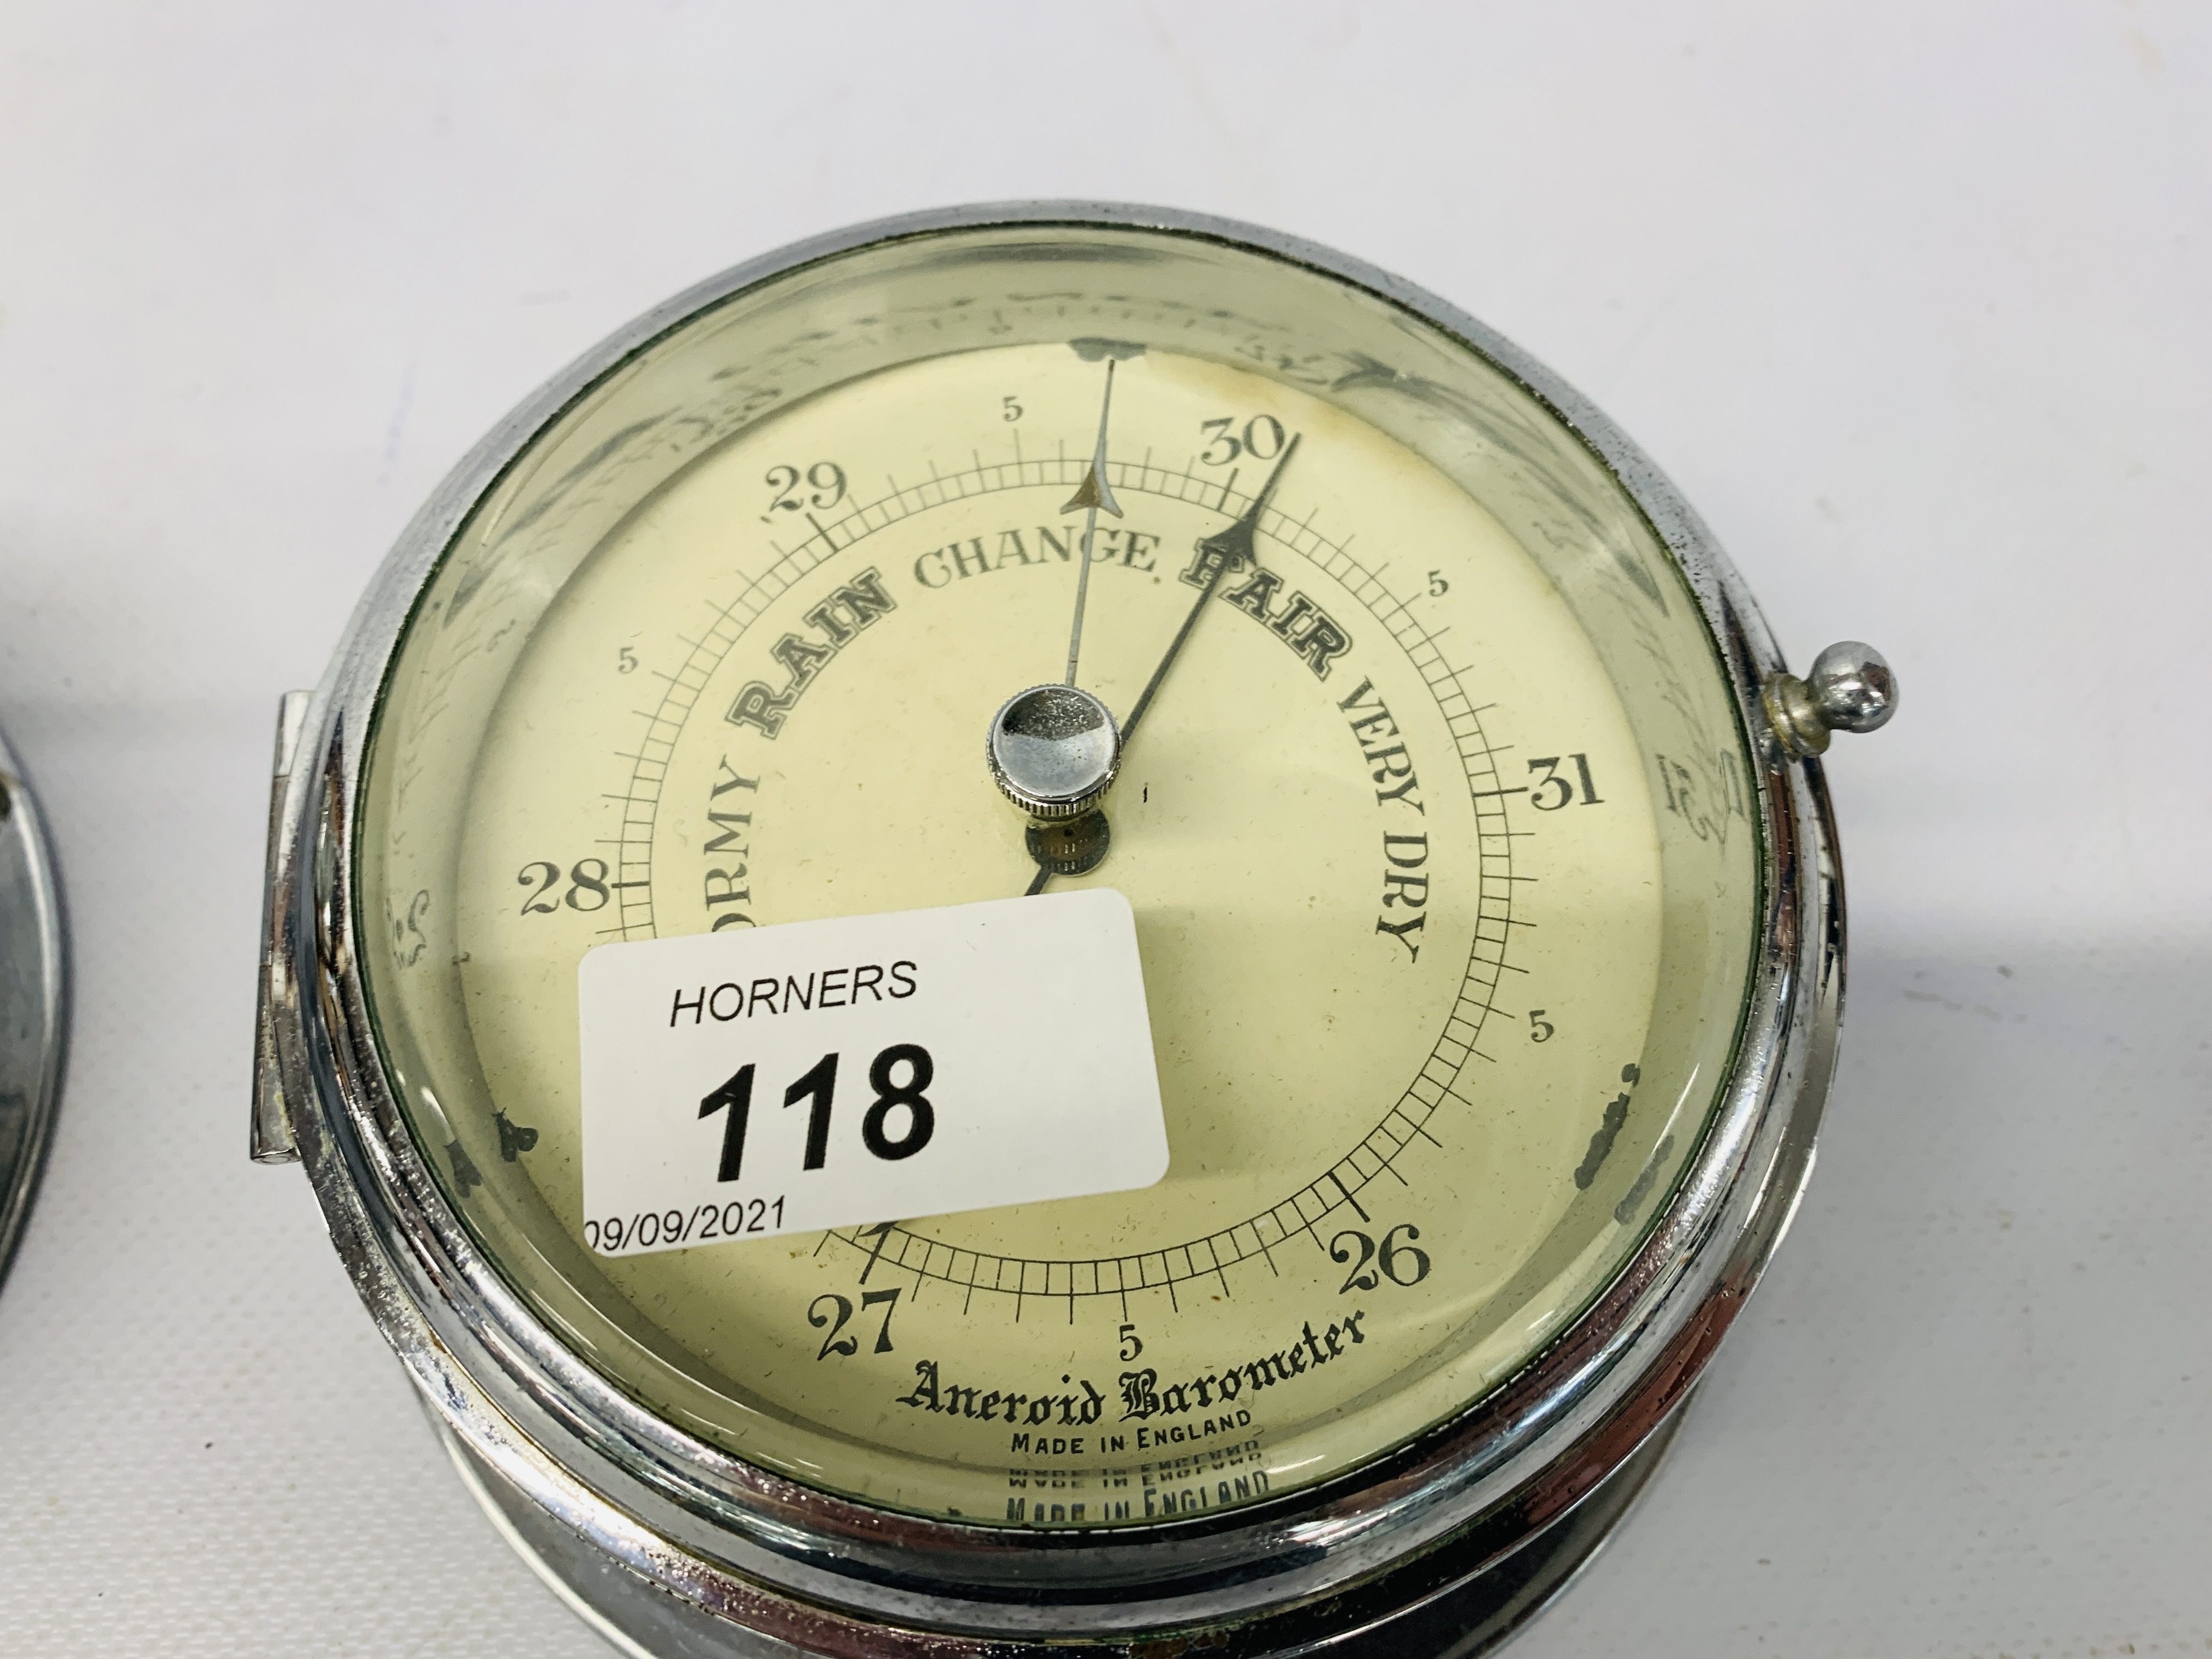 A CHROME CASED NAUTICAL CLOCK AND MATCHING ANAROID BAROMETER (REMOVED FROM 1930'S SAILING YACHT) - Image 3 of 5